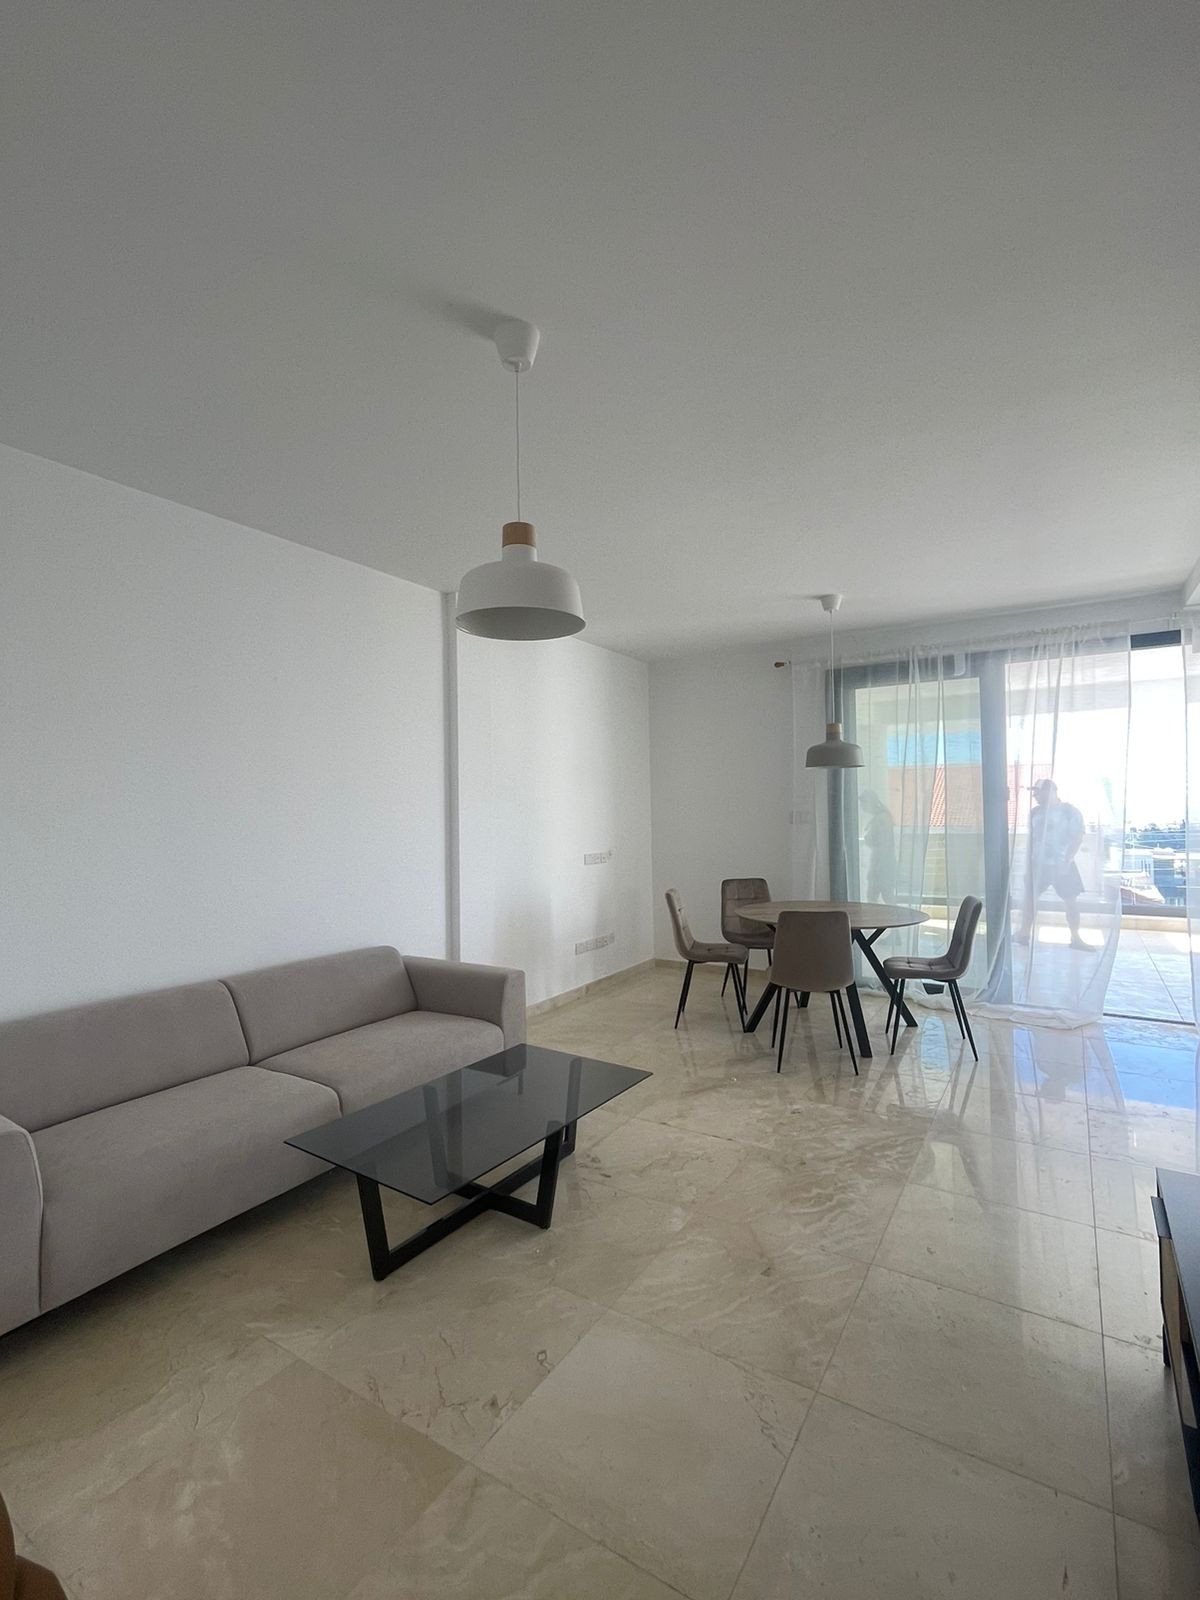 Property for Rent: Apartment (Flat) in Agios Athanasios, Limassol for Rent | Key Realtor Cyprus